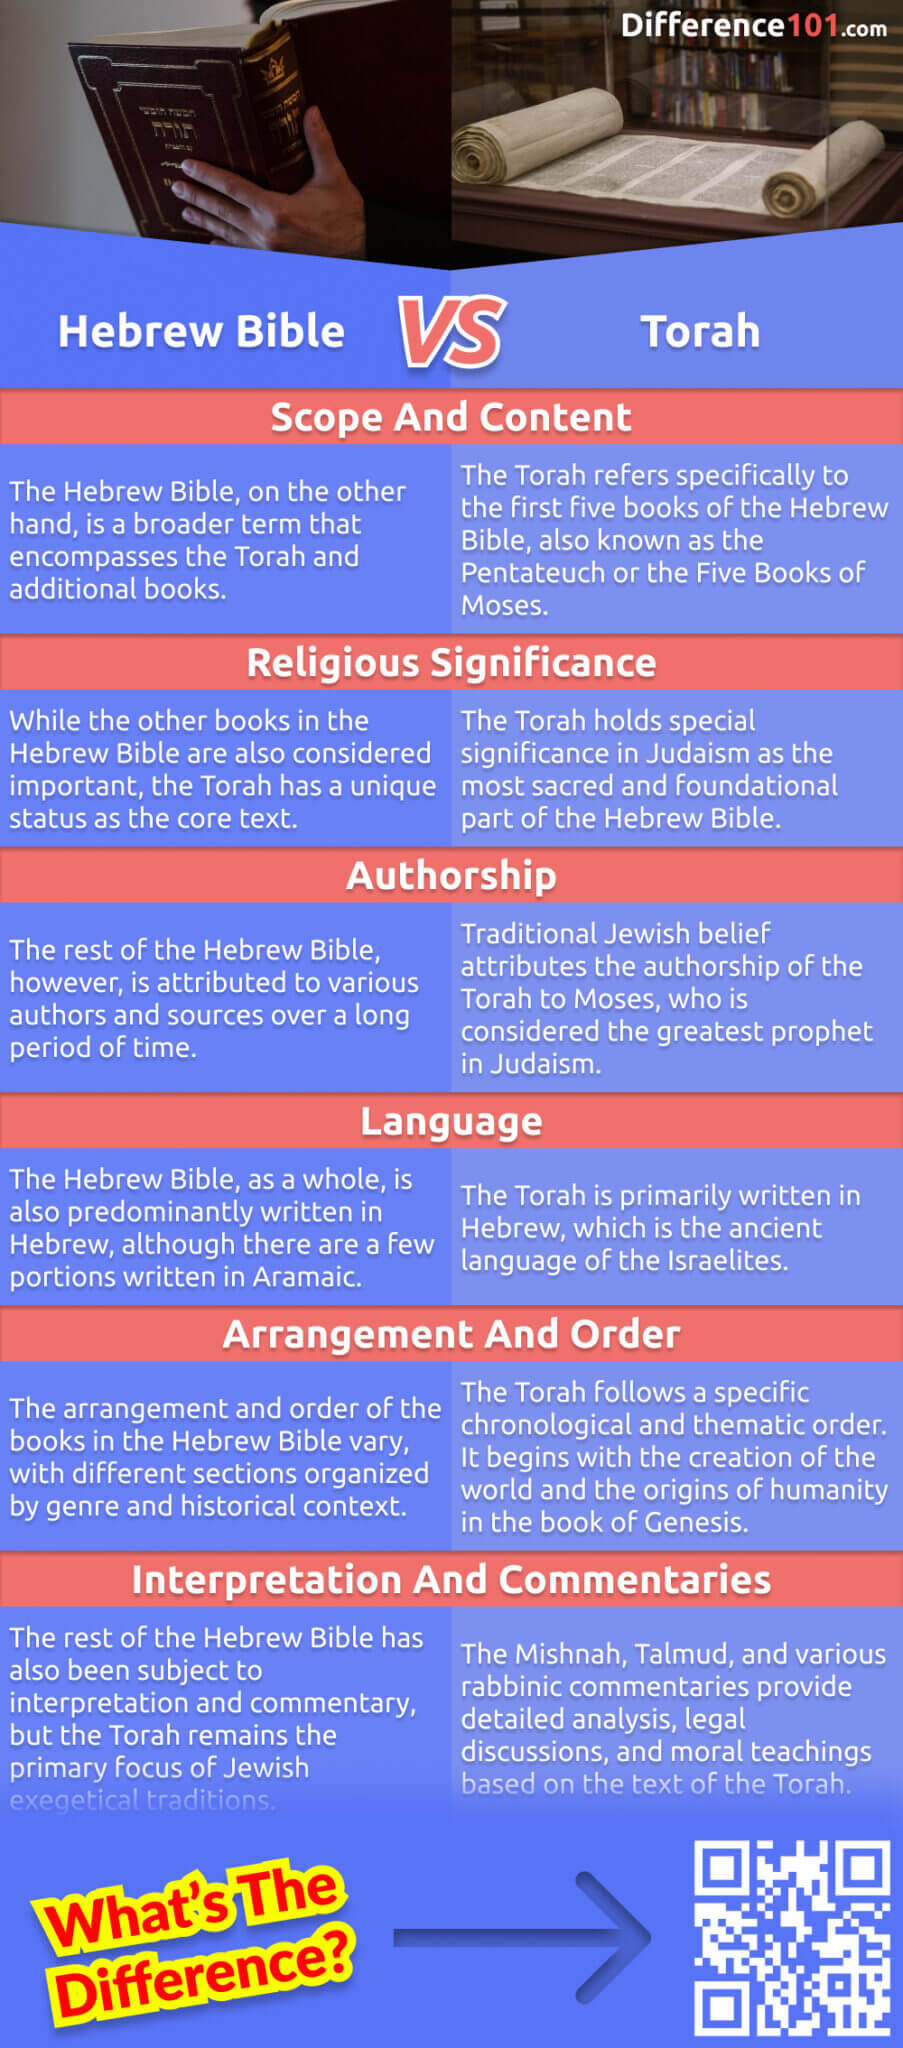 What's the difference between the Hebrew Bible and the Torah? Let's consider the pros and cons of each sacred text, their unique significance, and their impact on religious practice and belief. A deeper understanding of these foundational writings of the Jewish tradition.